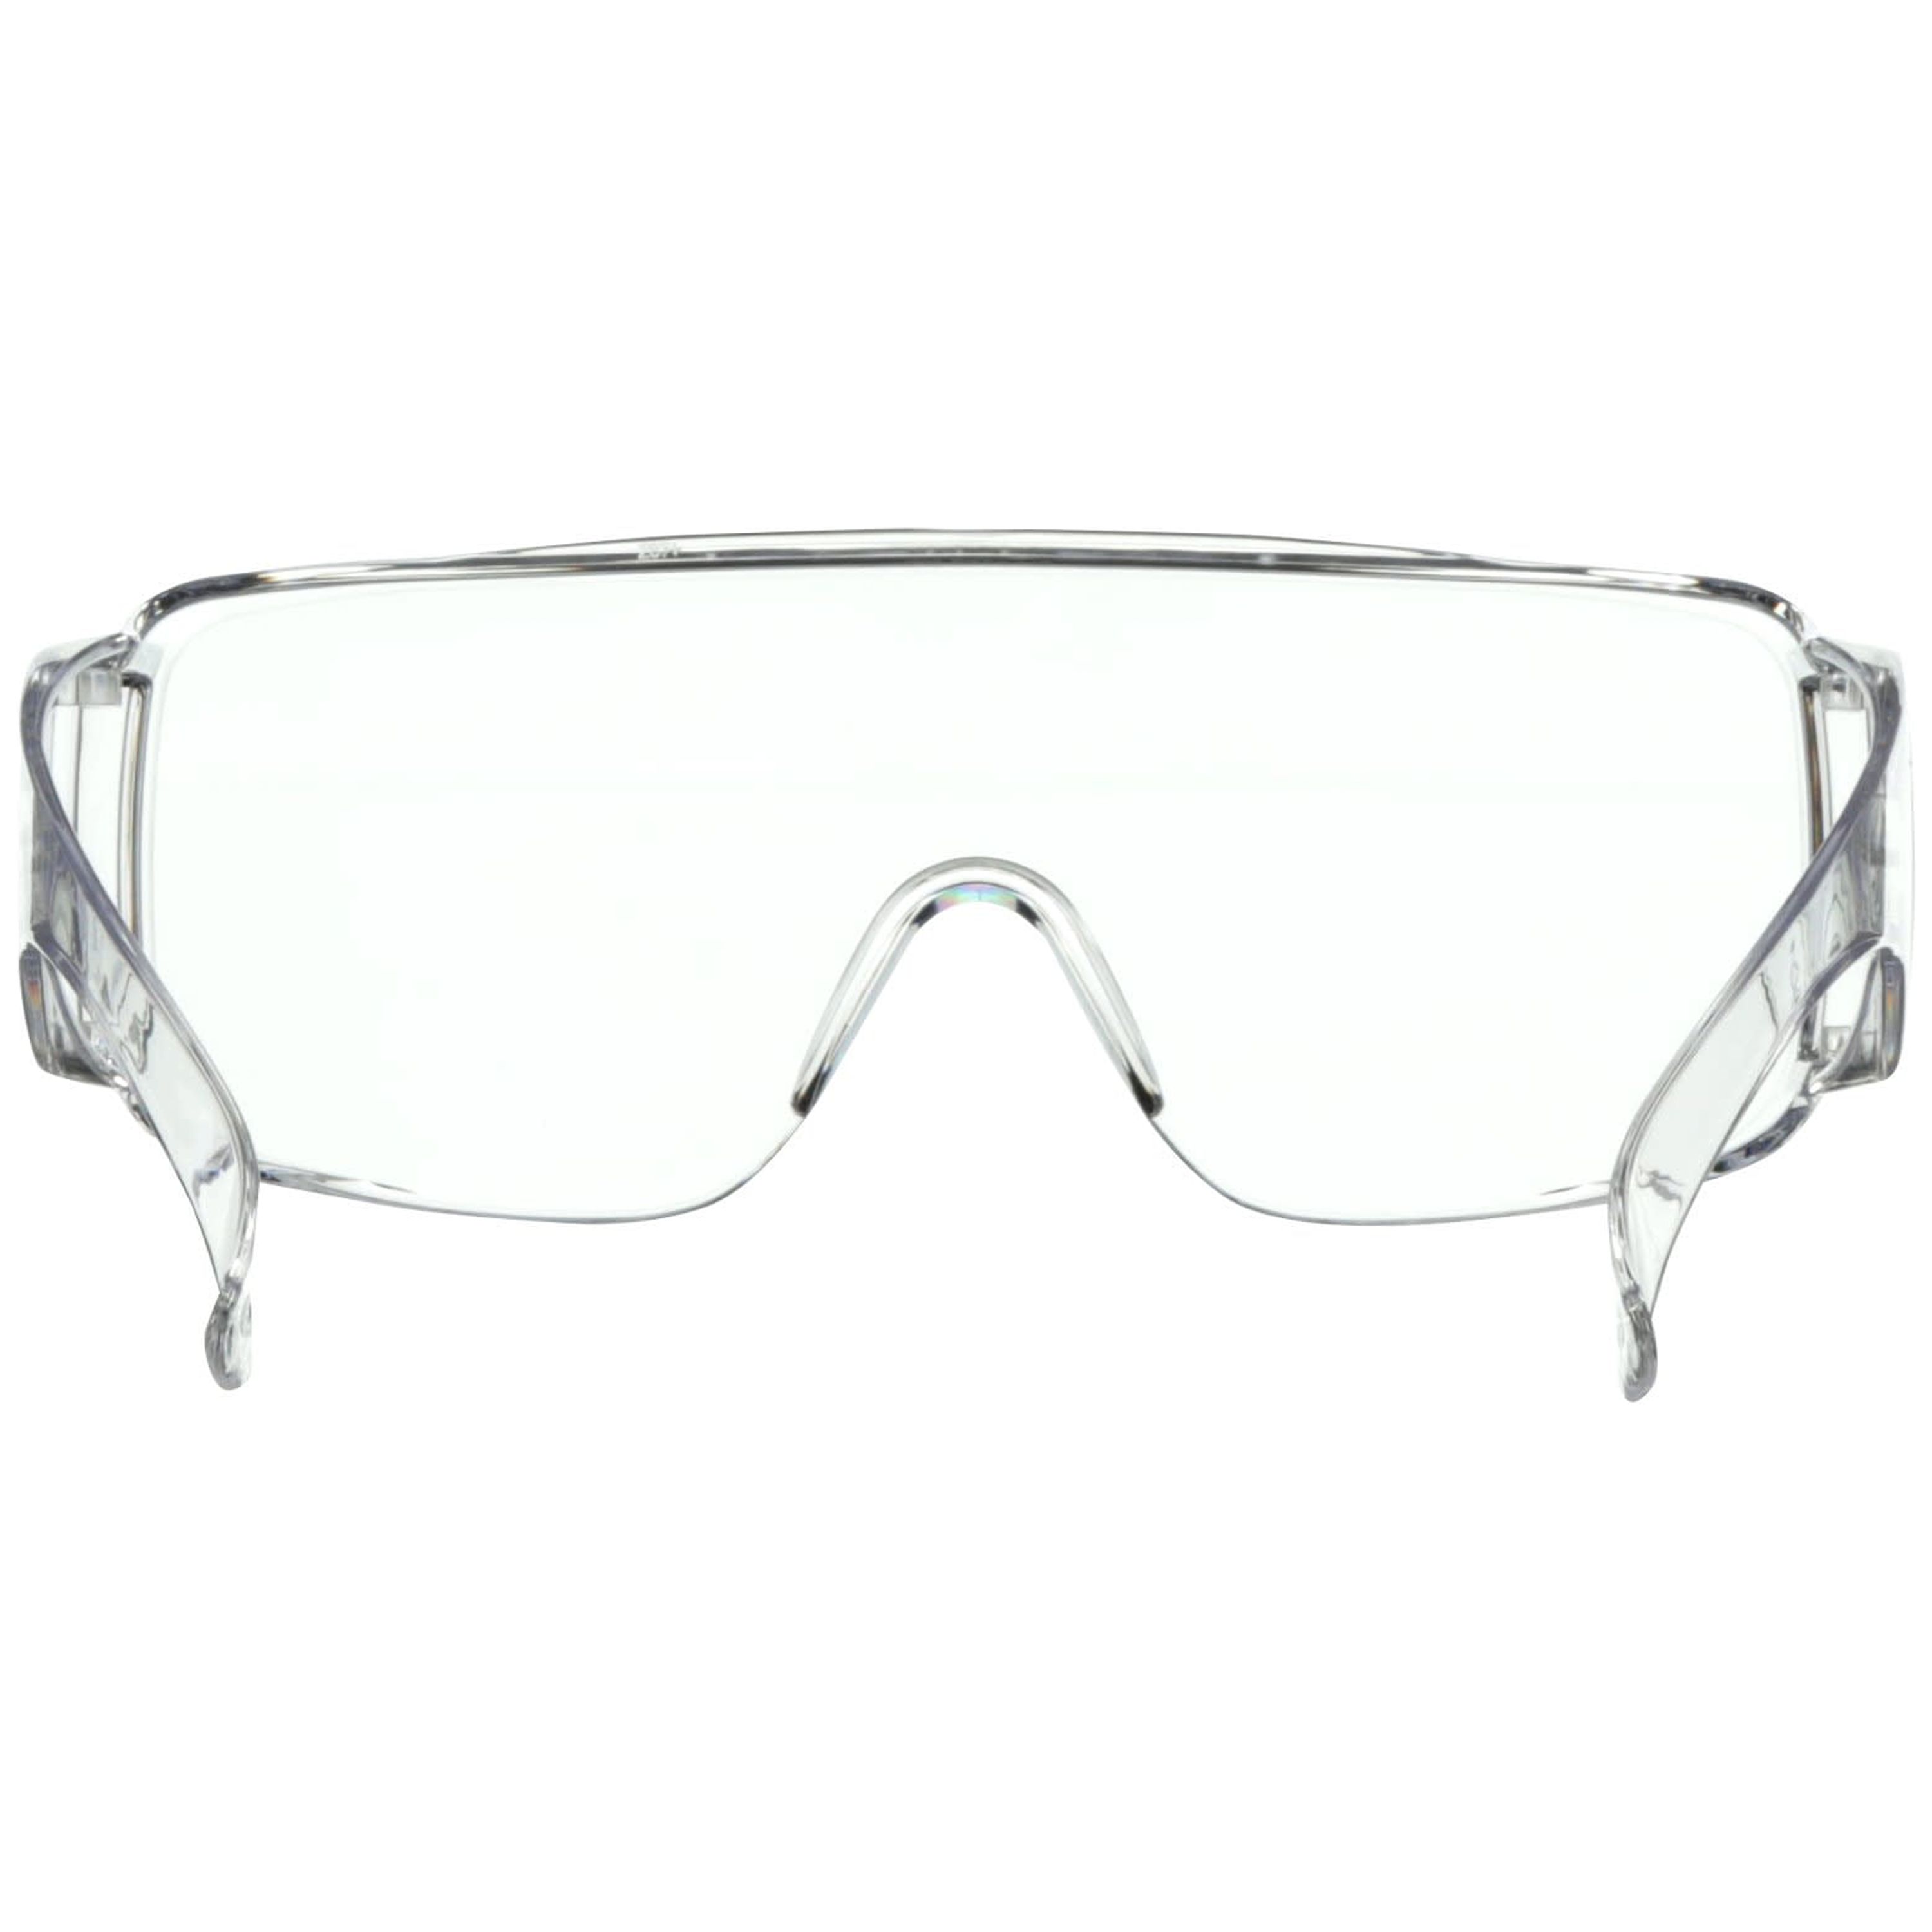 3M Over-the-Glass Clear Lens Eyewear Protection, Clear Frame - image 3 of 5